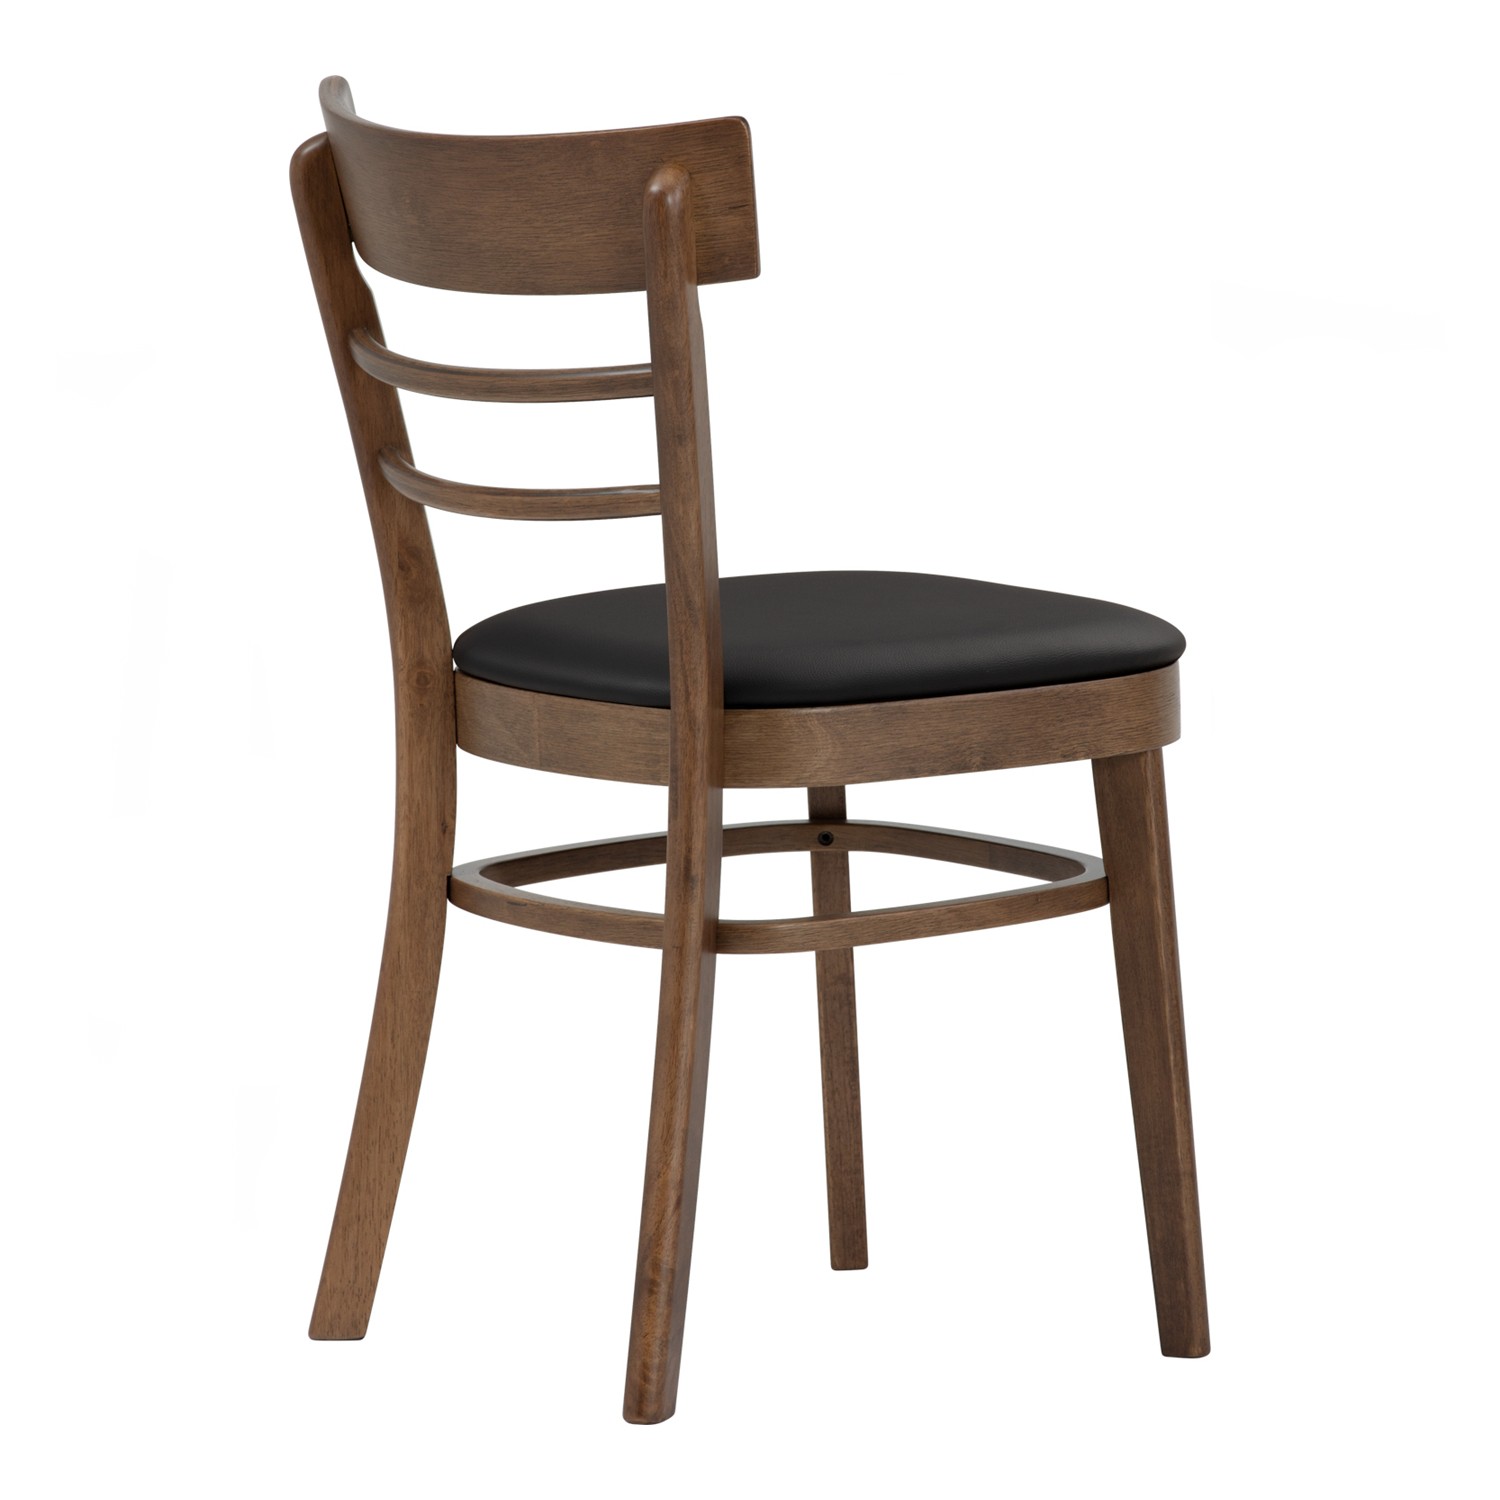 NAMID DINING CHAIR 109/520